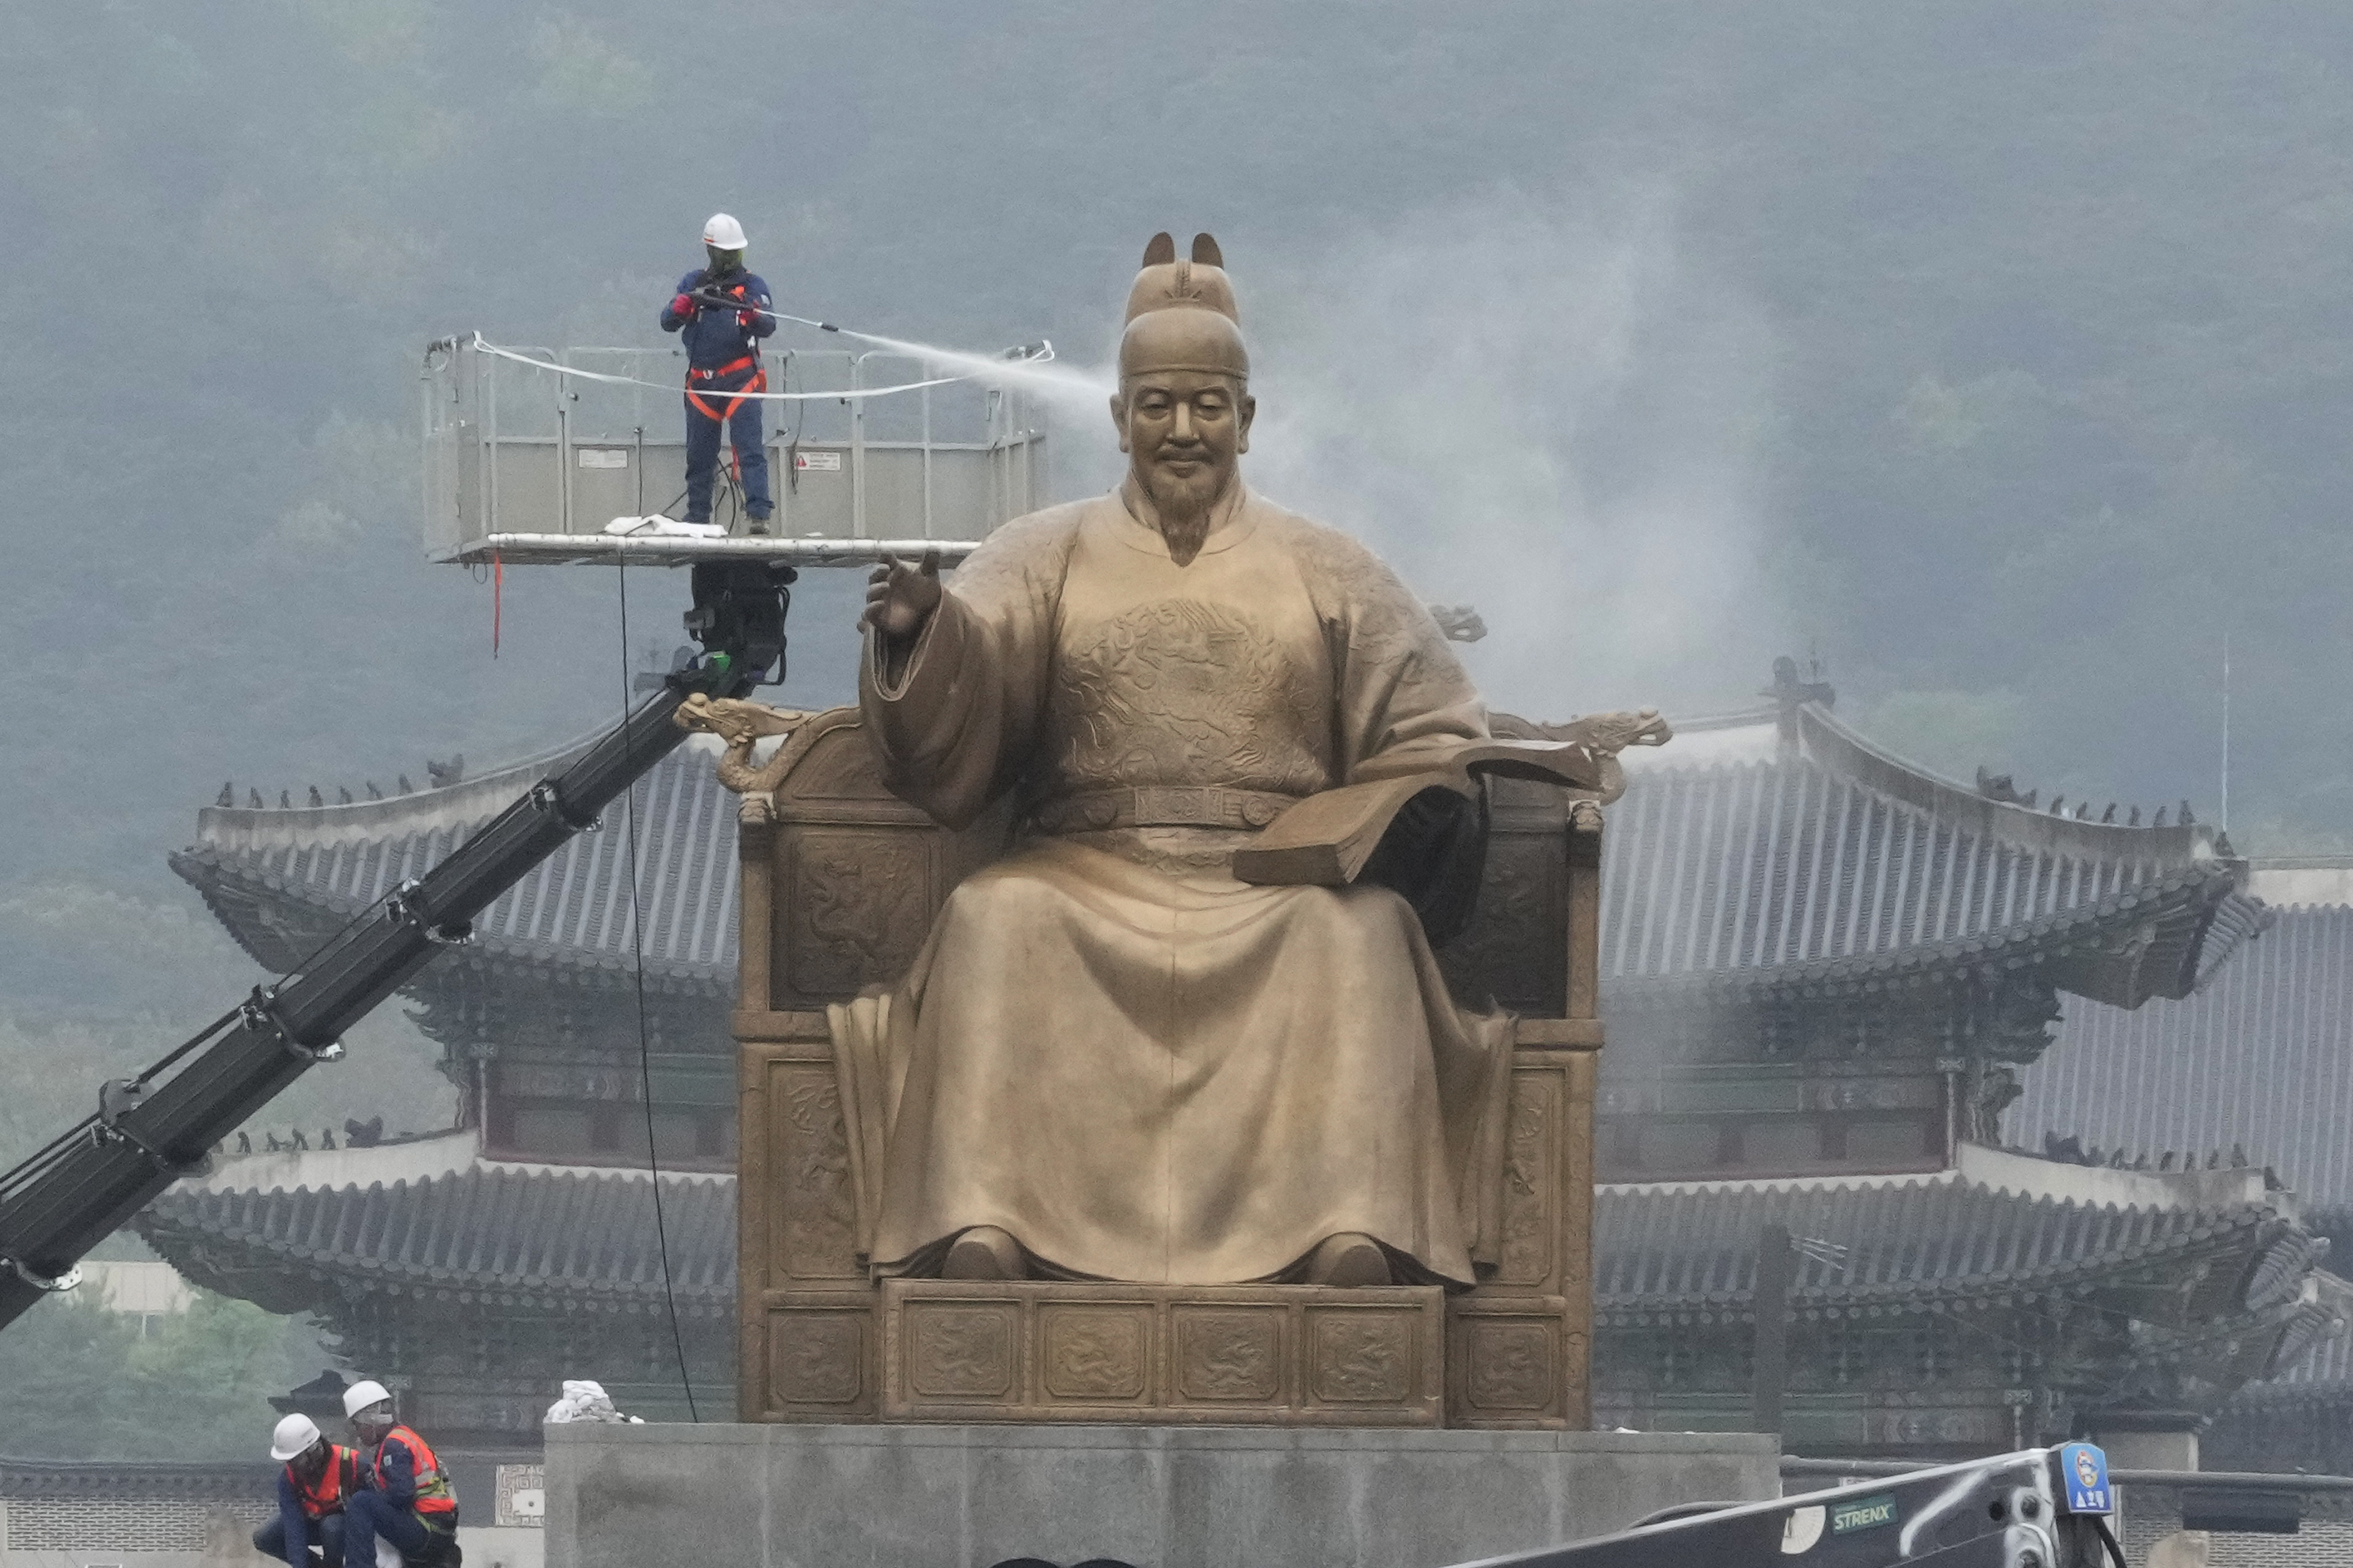 The Statue of King Sejong receives a spring clean at the Gwanghwamun Plaza in Seoul. Regarded as one of Korea’s greatest rulers, Sejong is best known as the creator of Hangul, the native alphabet of the Korean language